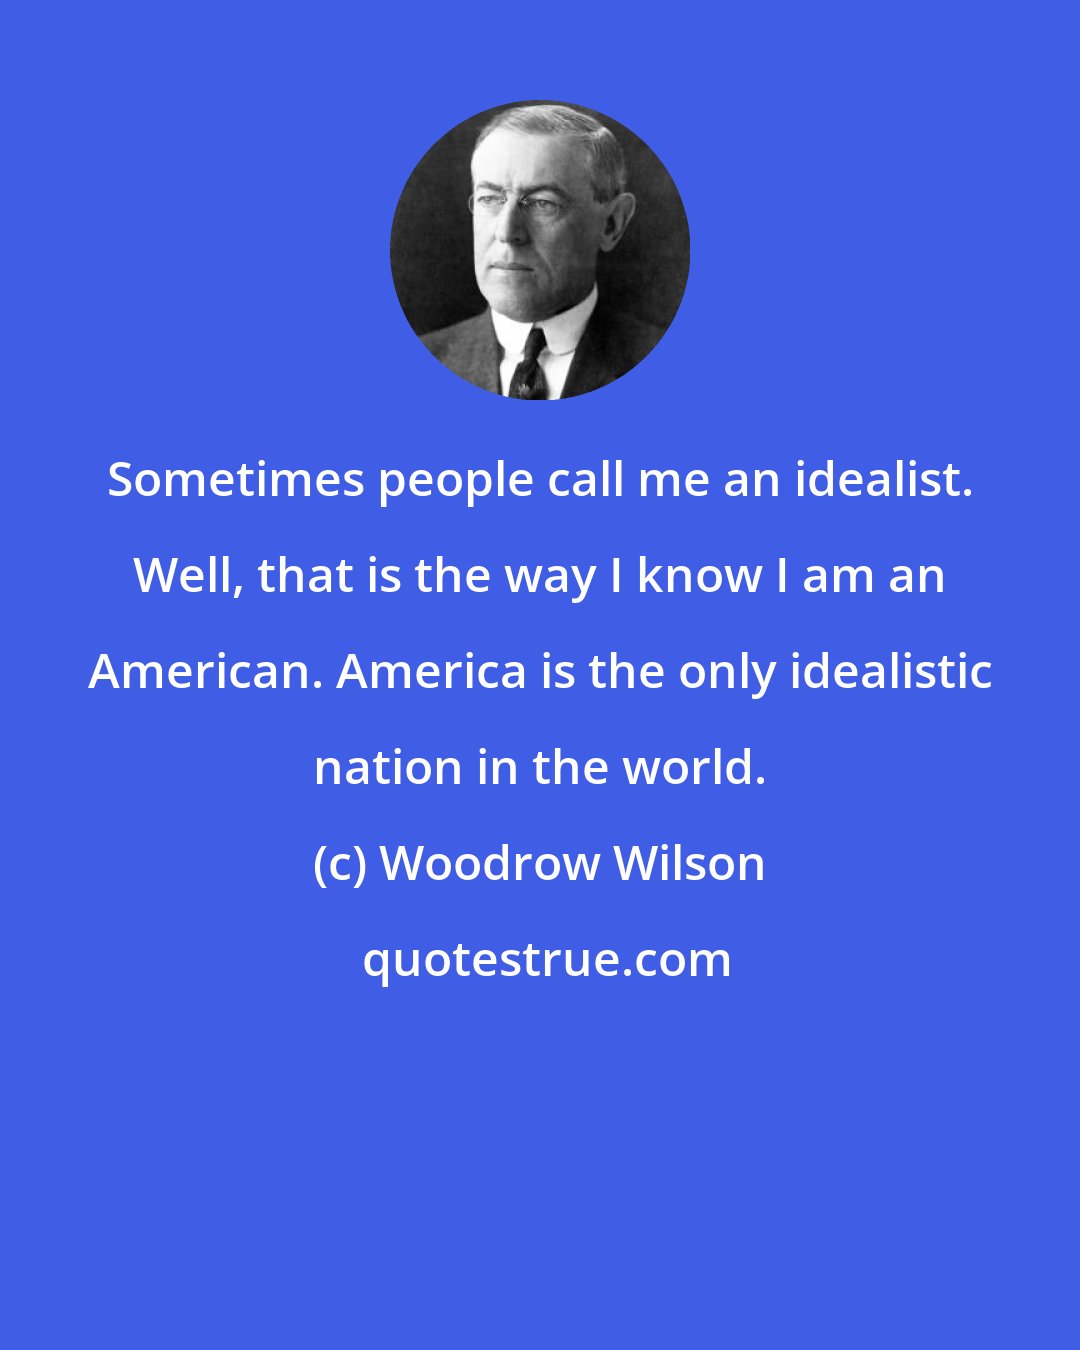 Woodrow Wilson: Sometimes people call me an idealist. Well, that is the way I know I am an American. America is the only idealistic nation in the world.